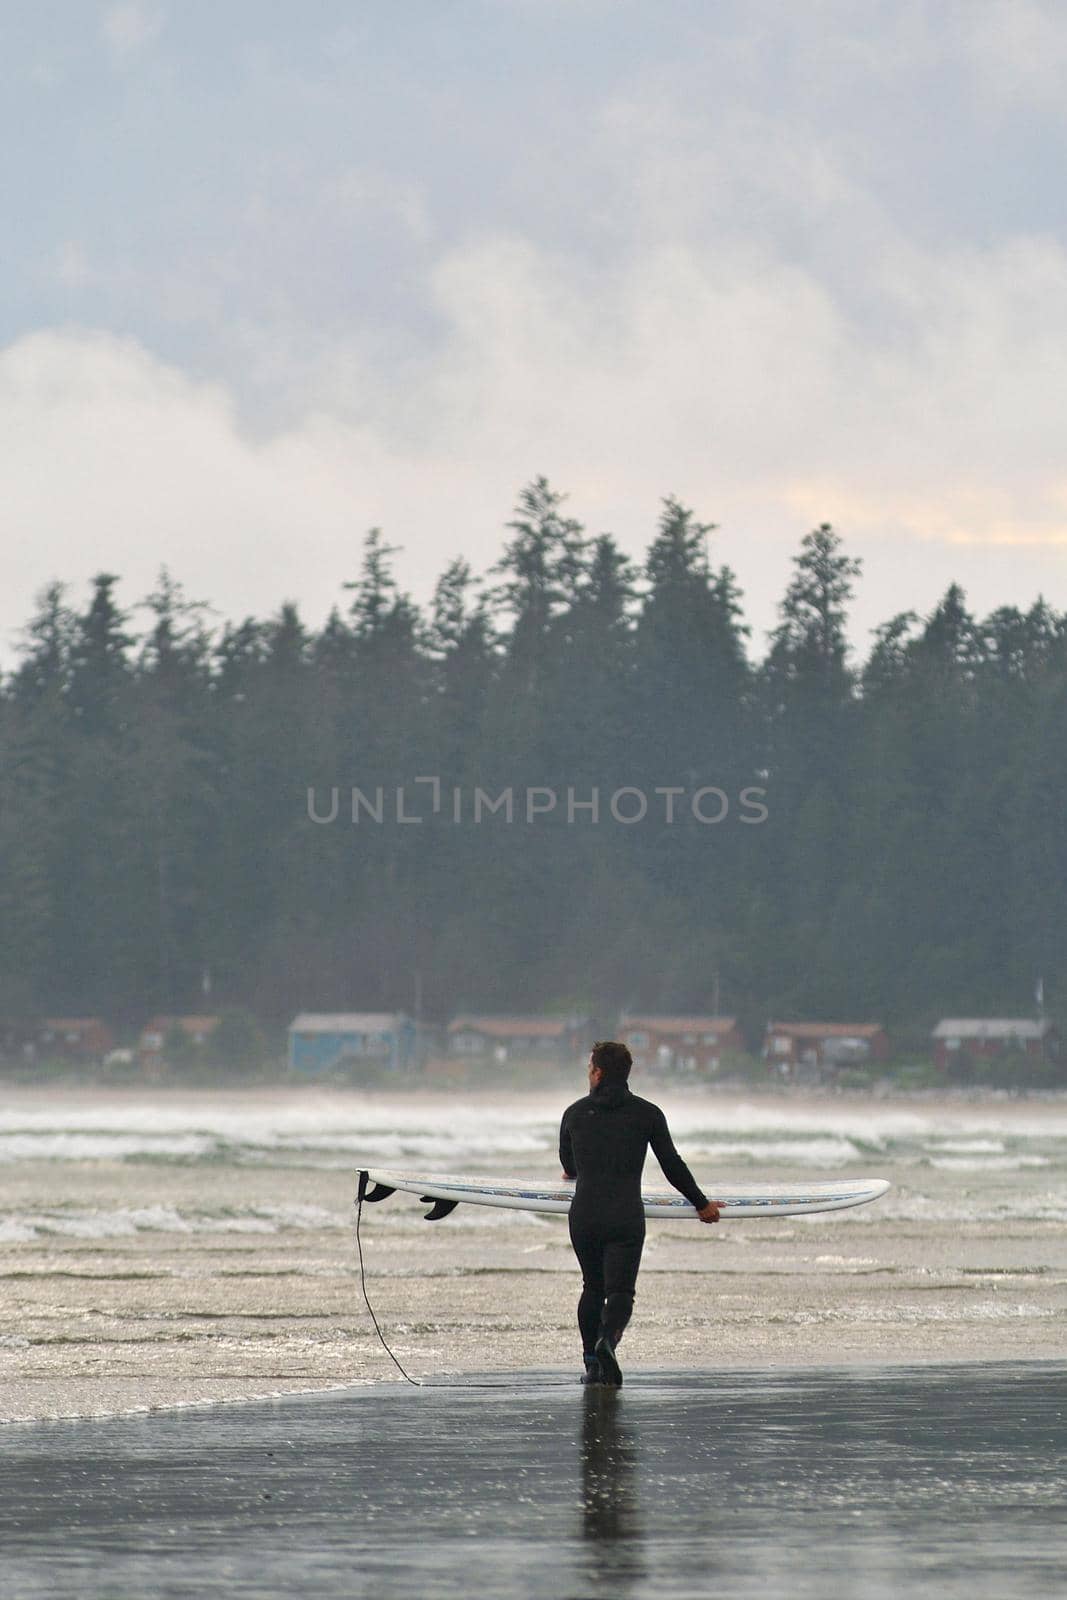 A Surfer Carries his Board Along the Beach in Tofino British Columbia in Canada by markvandam